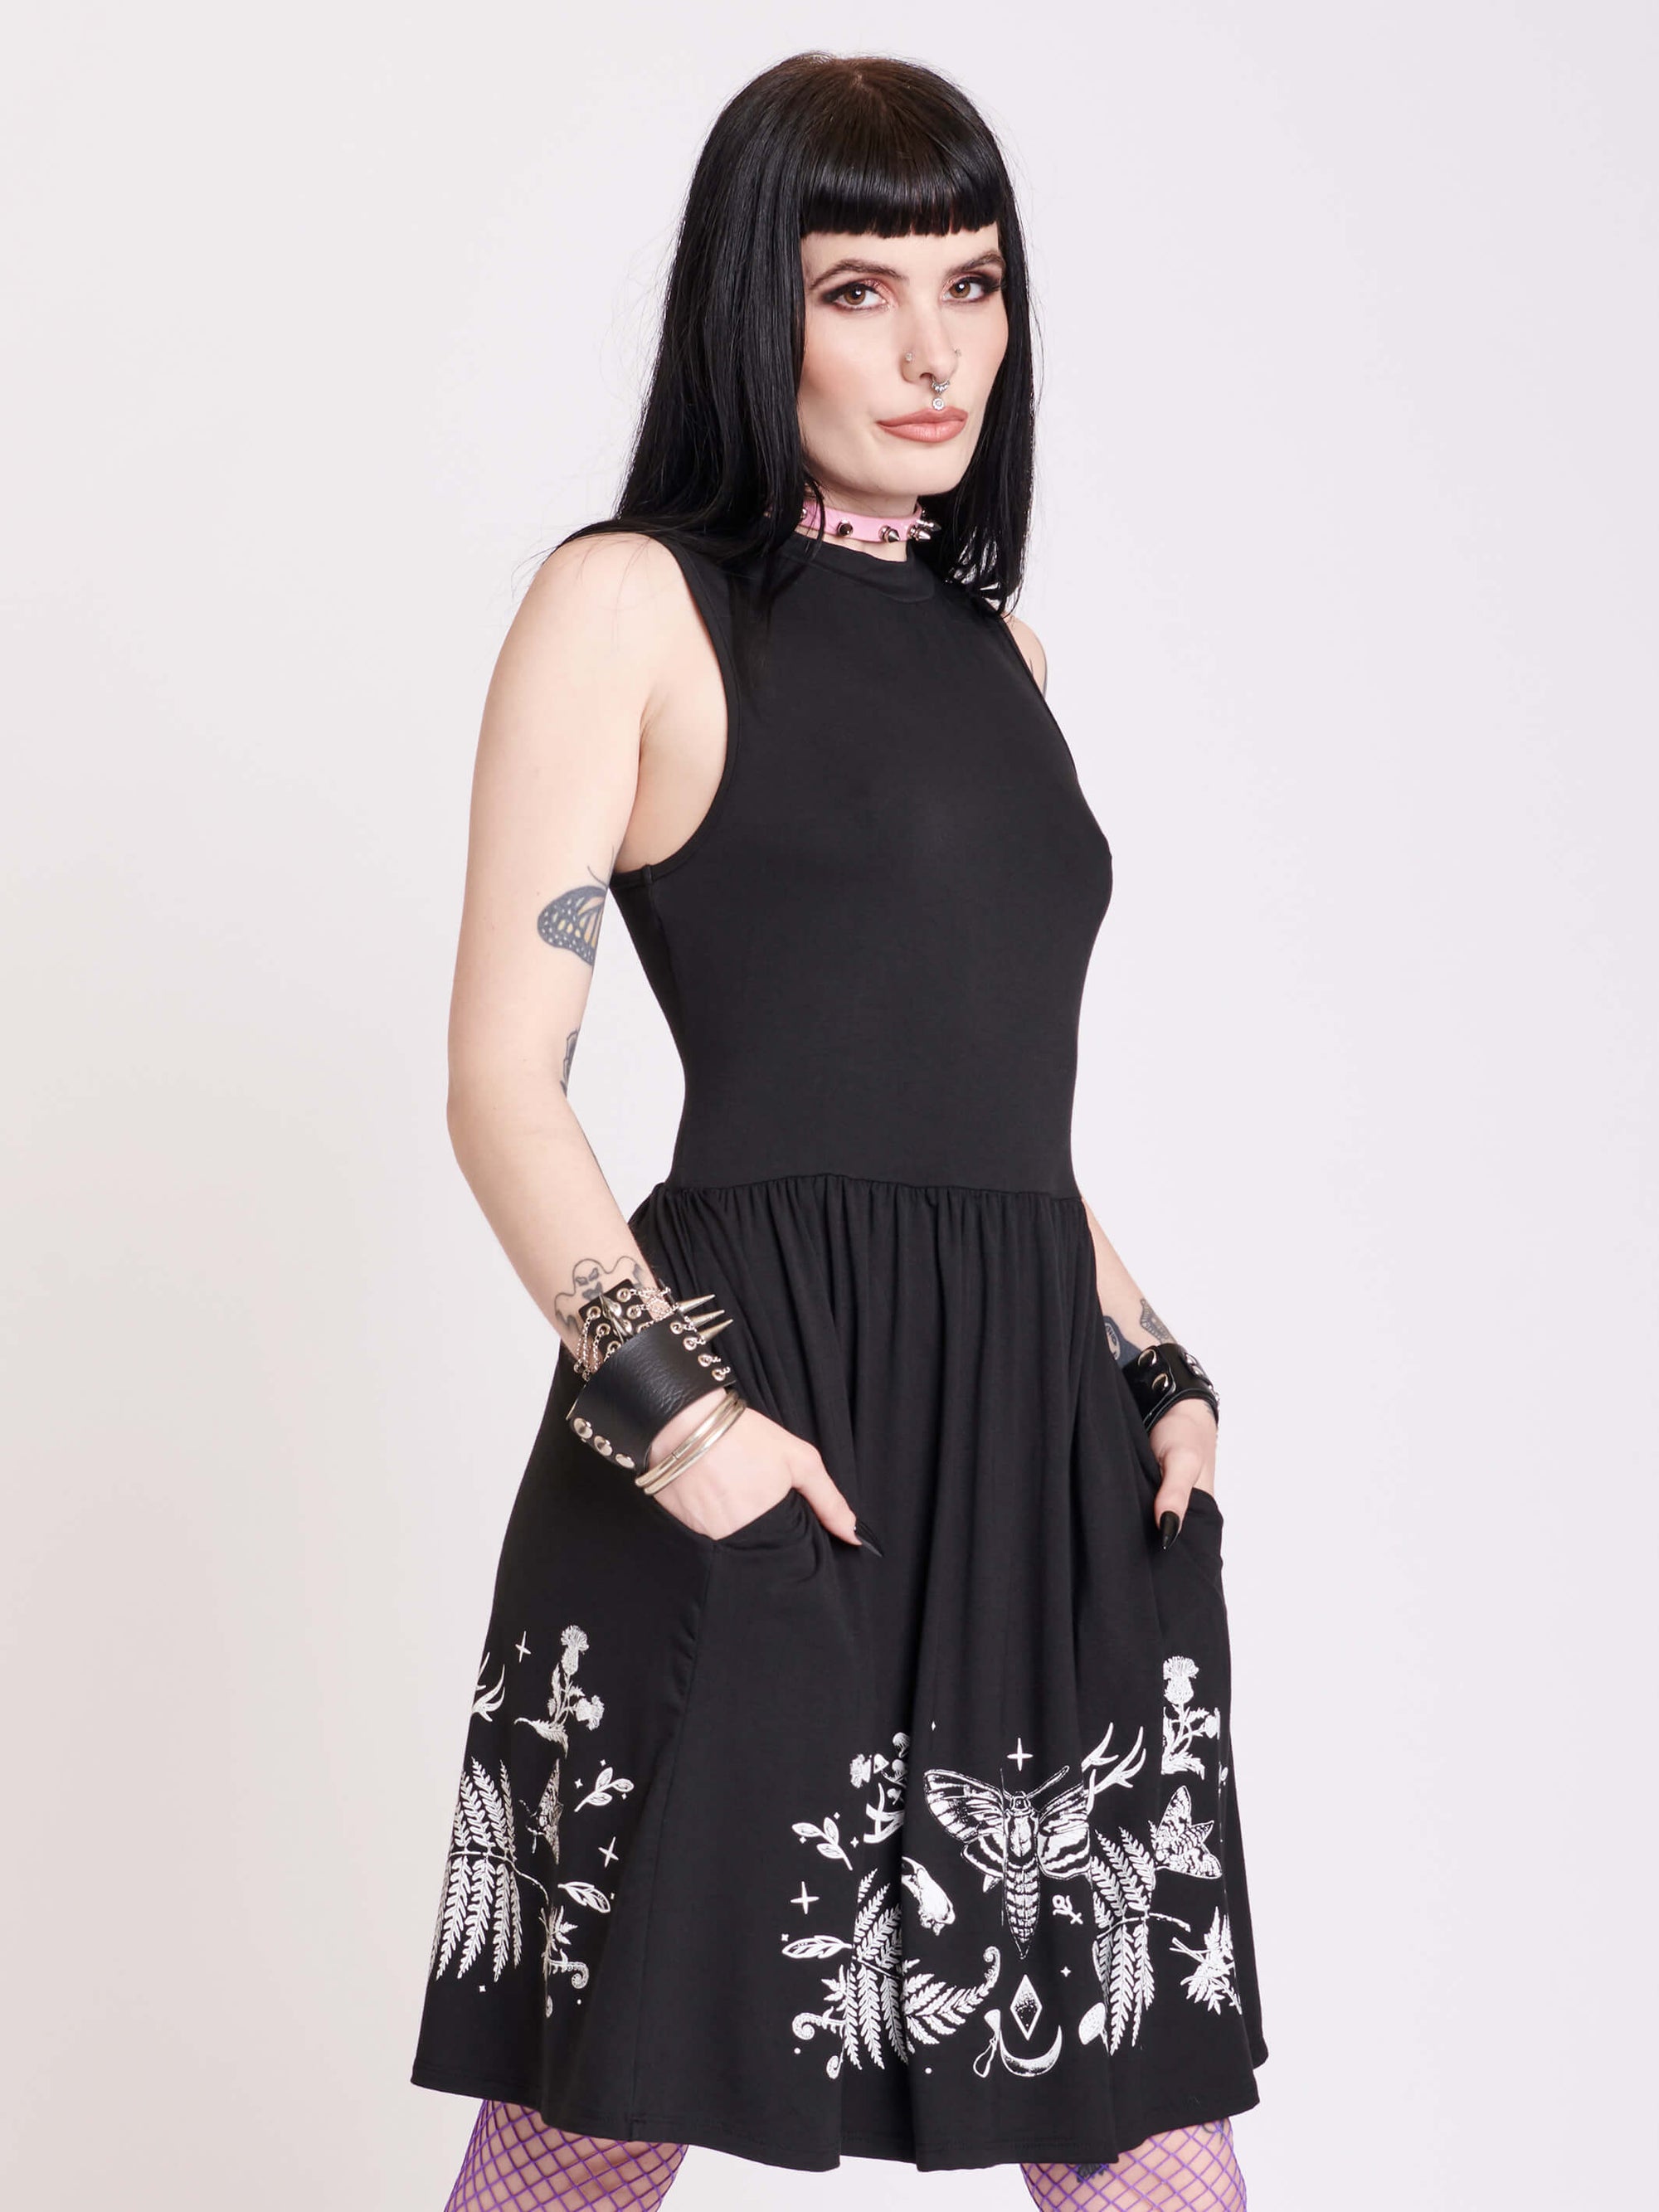 black sleevless dress with forest findings graphics on skirt